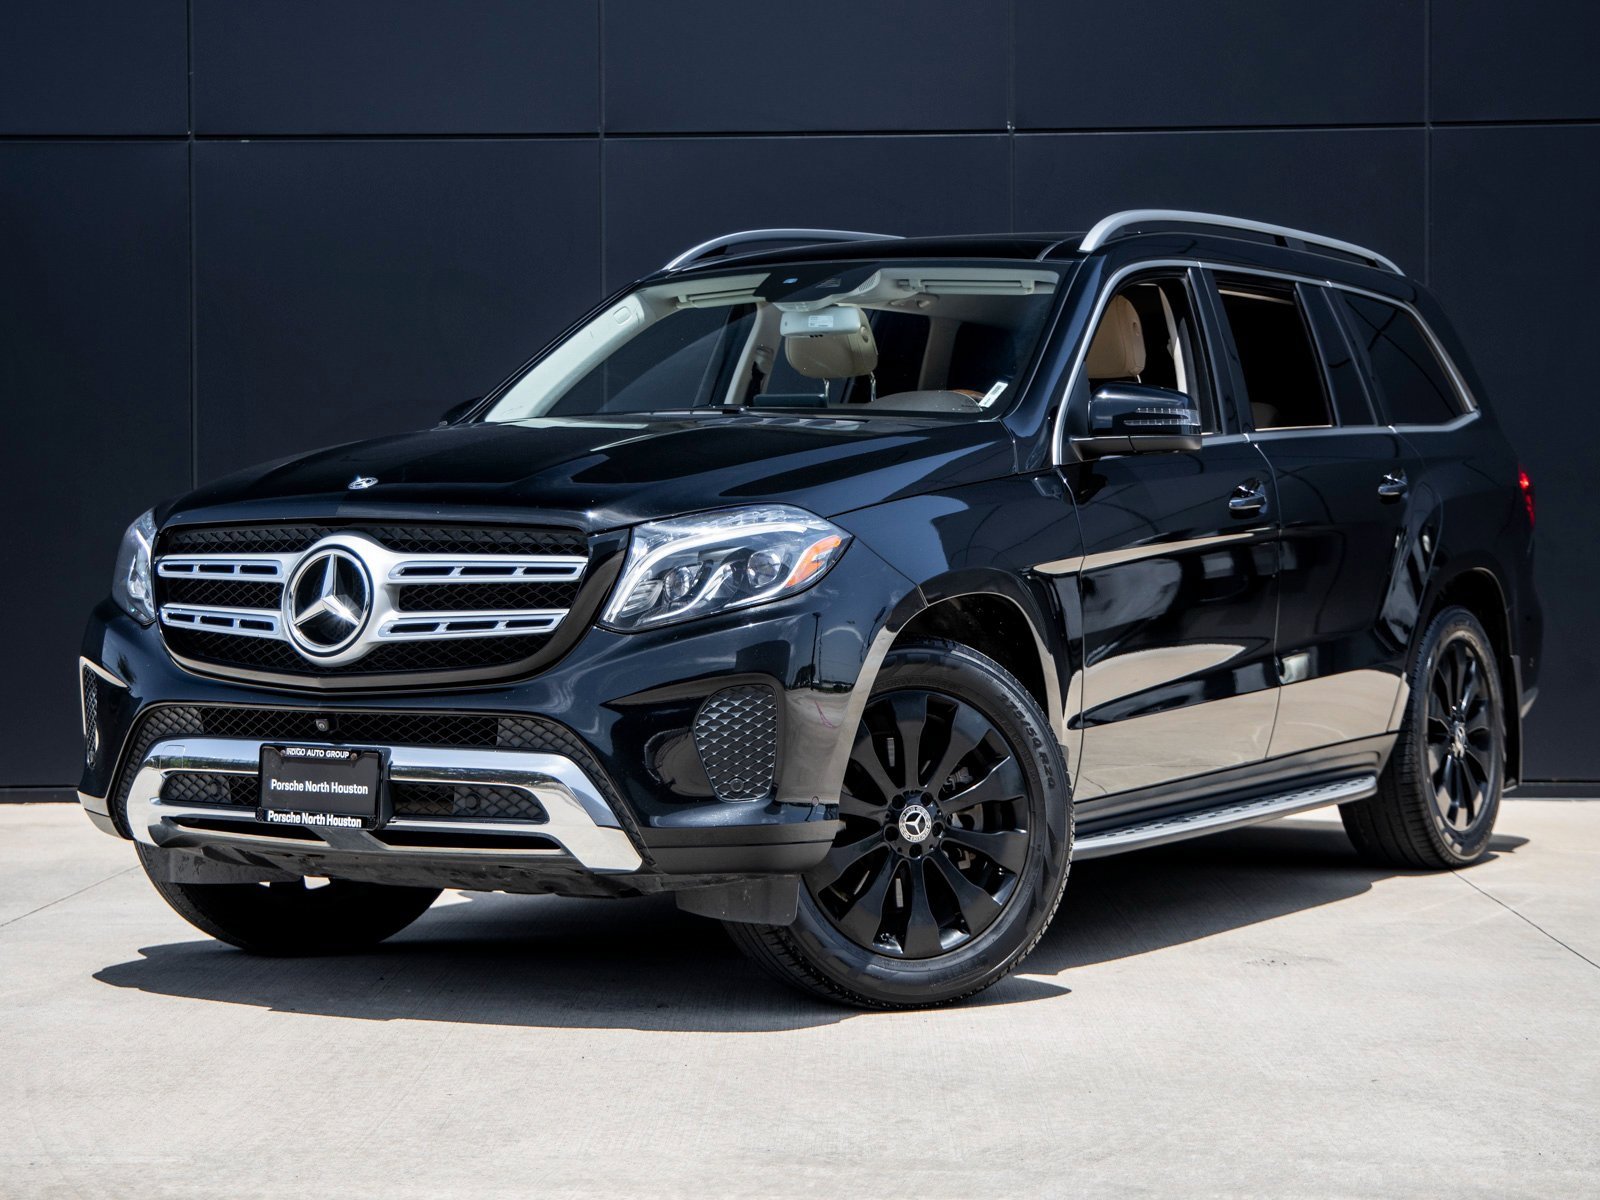 Used 2018 Mercedes-Benz GLS 450 for Sale Right Now - Autotrader